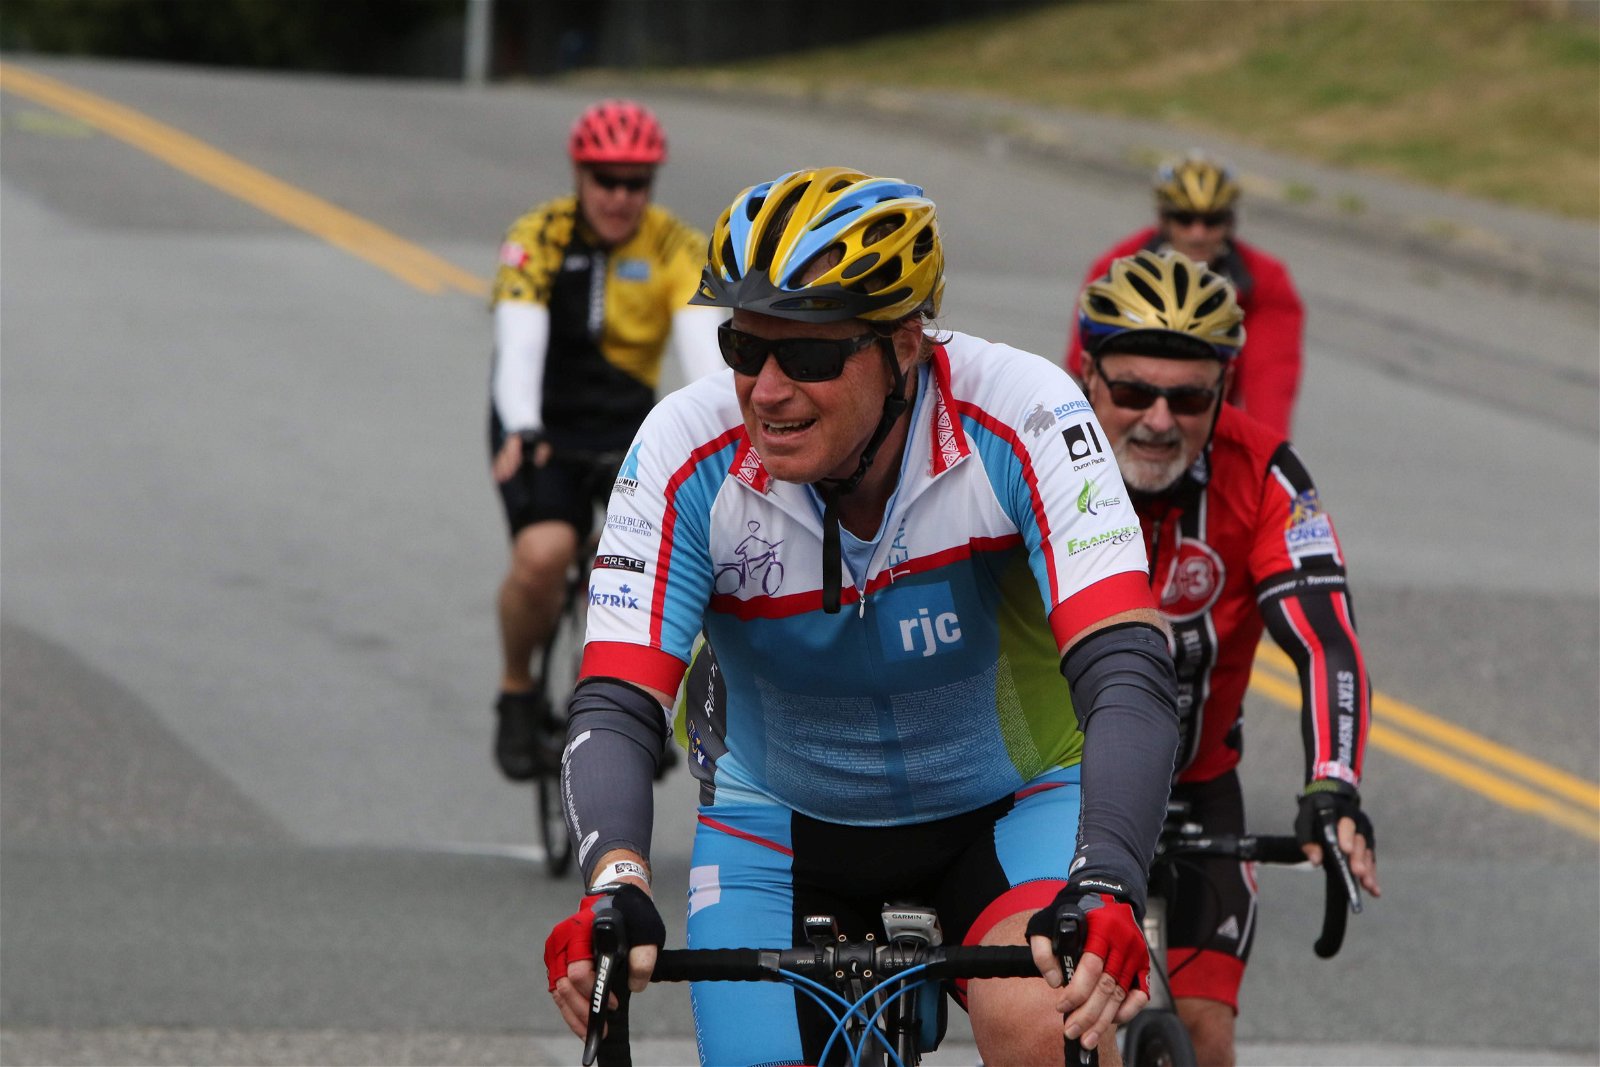 Rjc Ride To Conquer Cancer 16